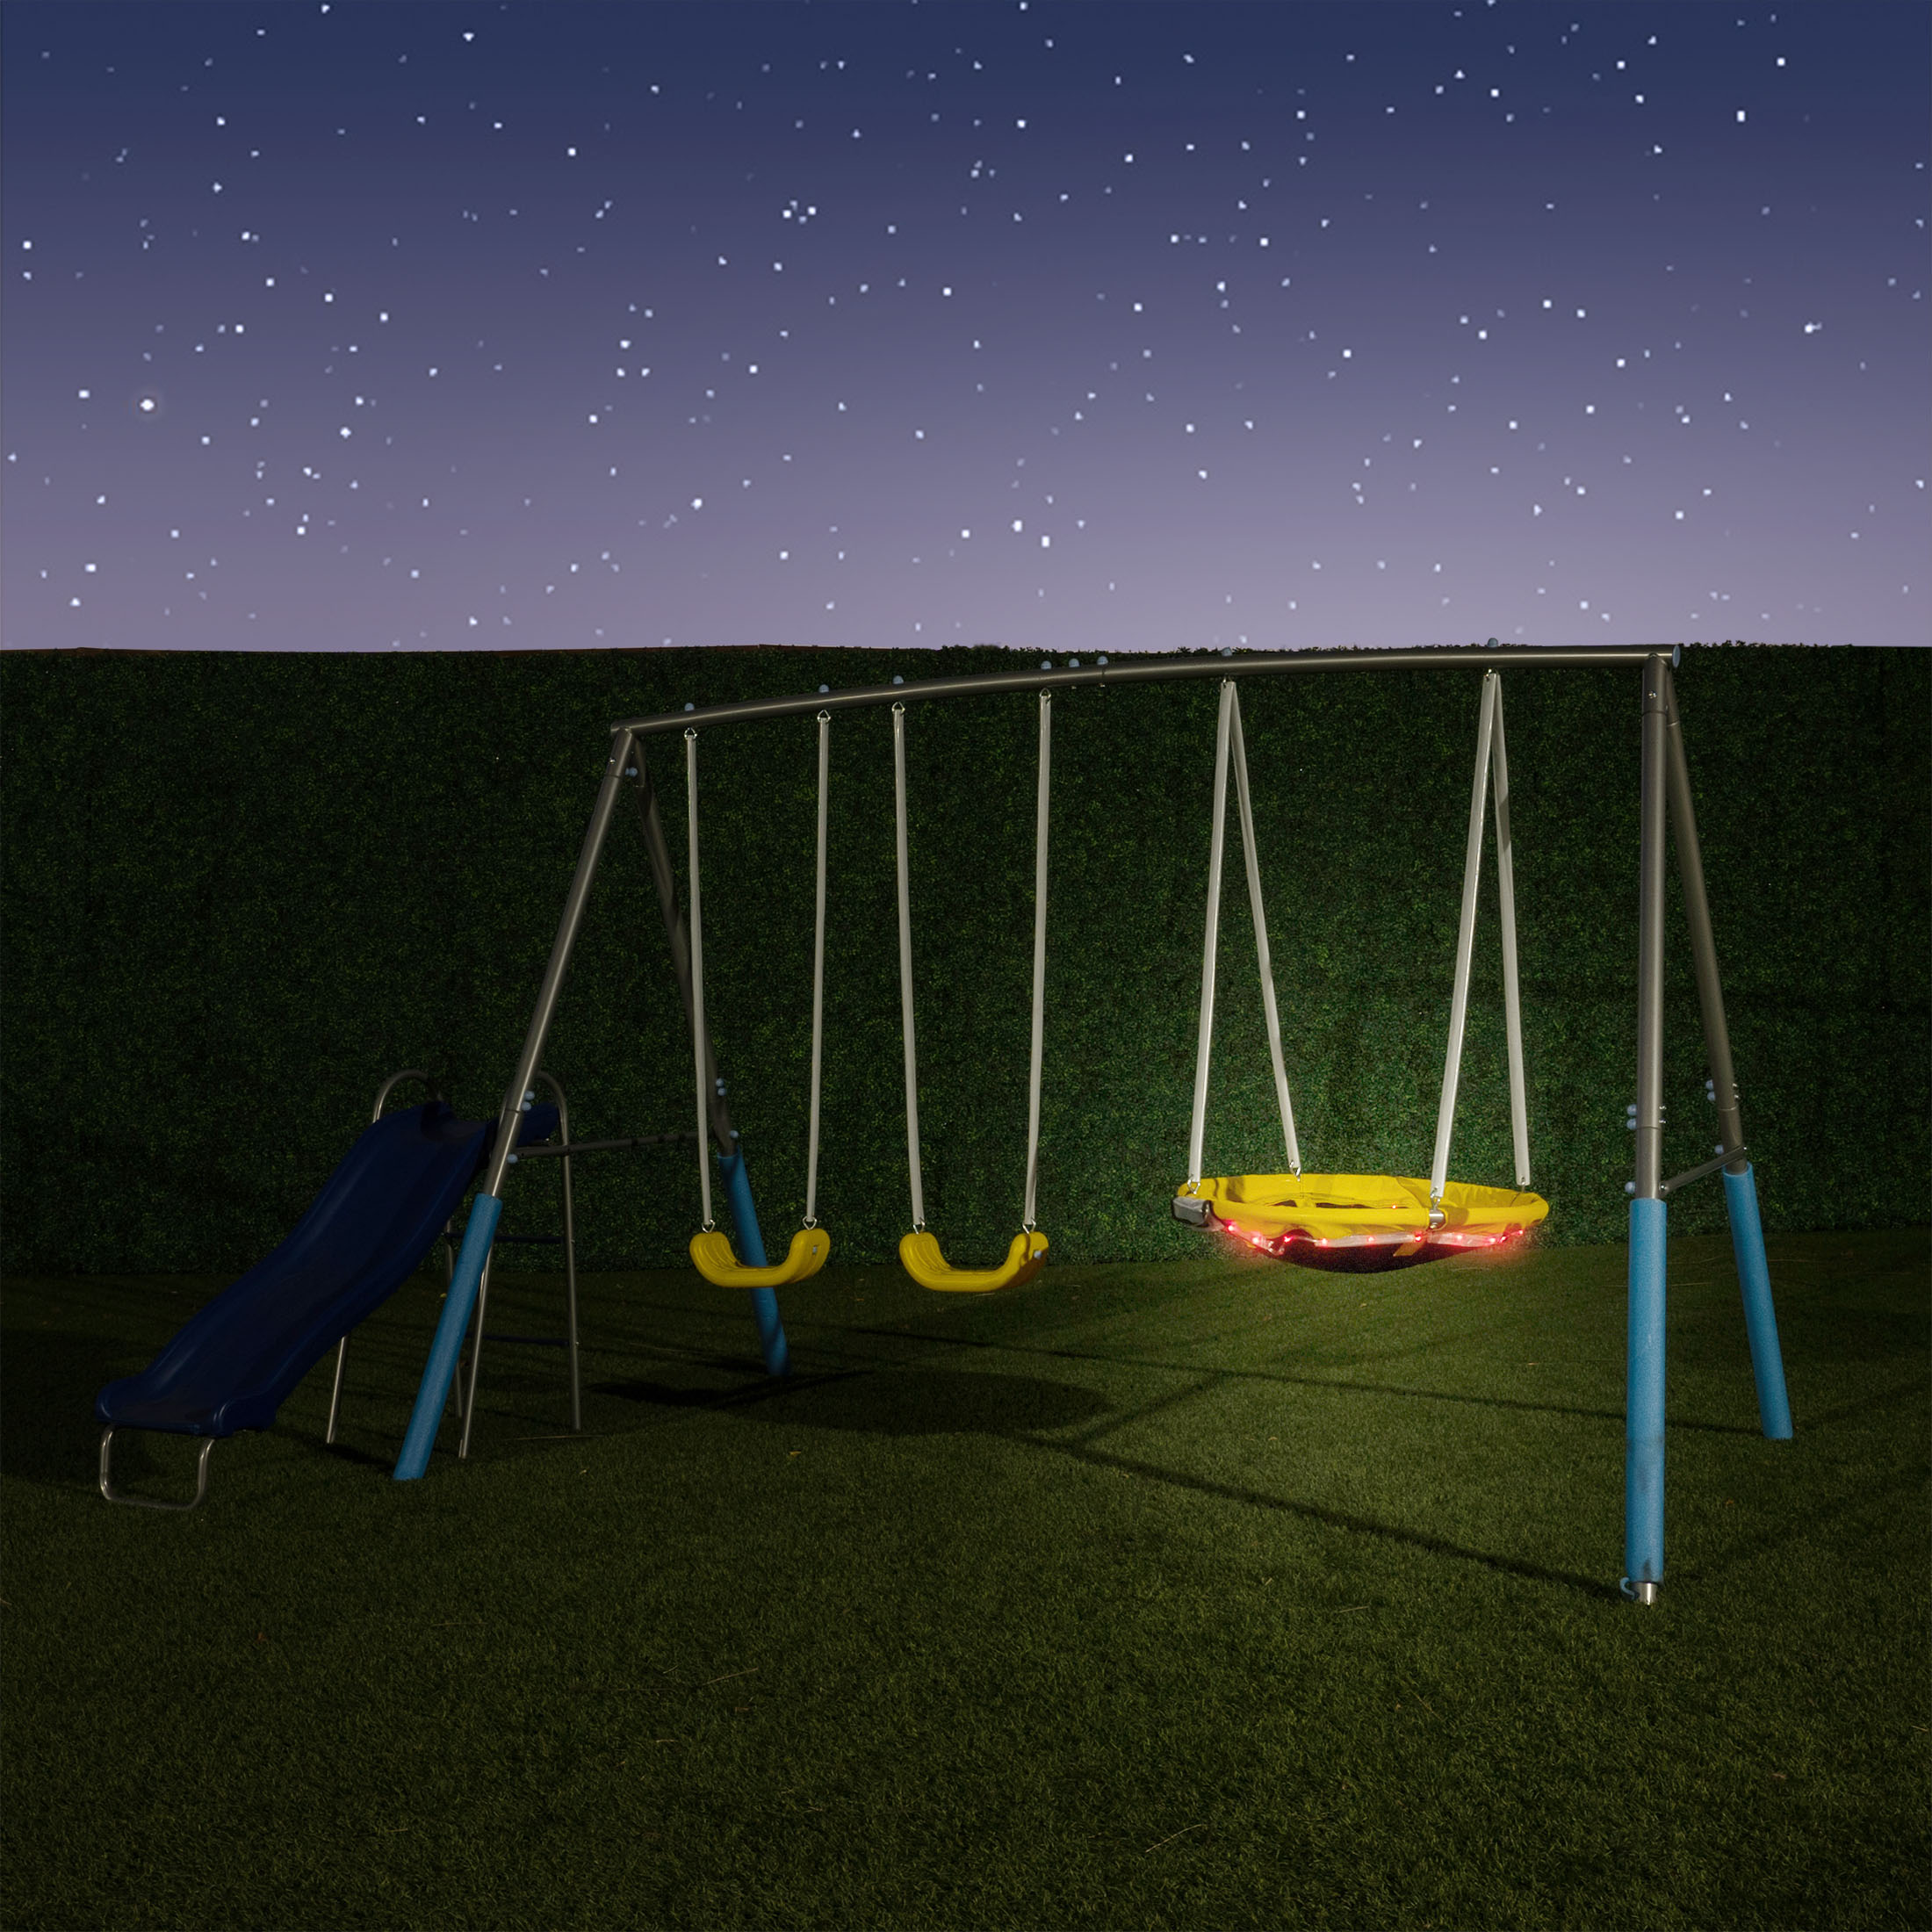 Sportspower Comet Metal Swing Set with LED Light up Saucer Swing, 2 Swings, and Lifetime Warranty on Blow Molded Slide - image 4 of 15